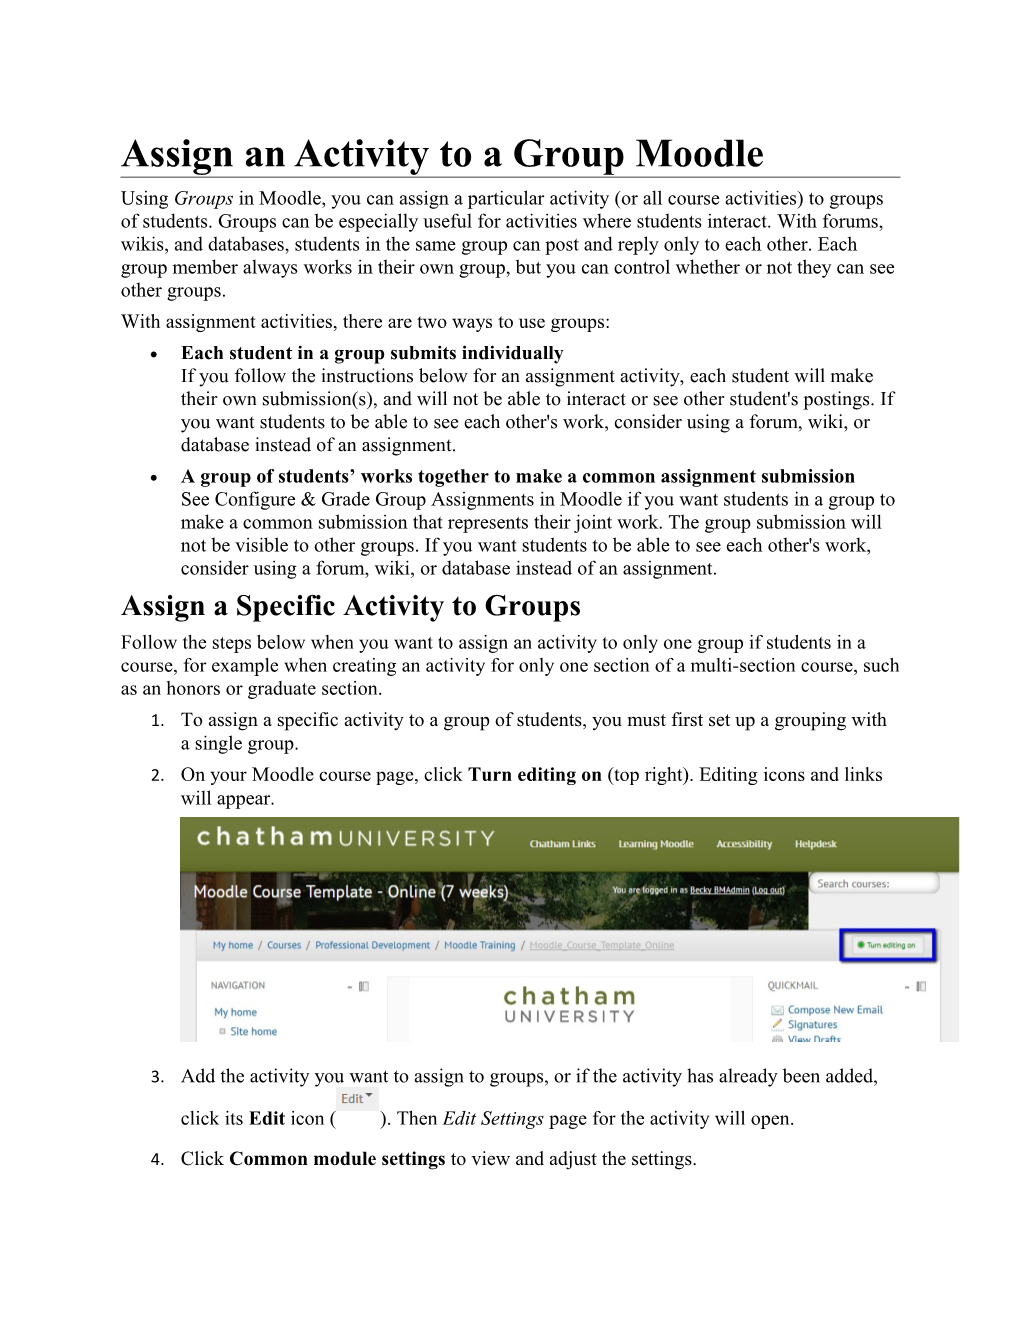 Assign an Activity to a Group Moodle